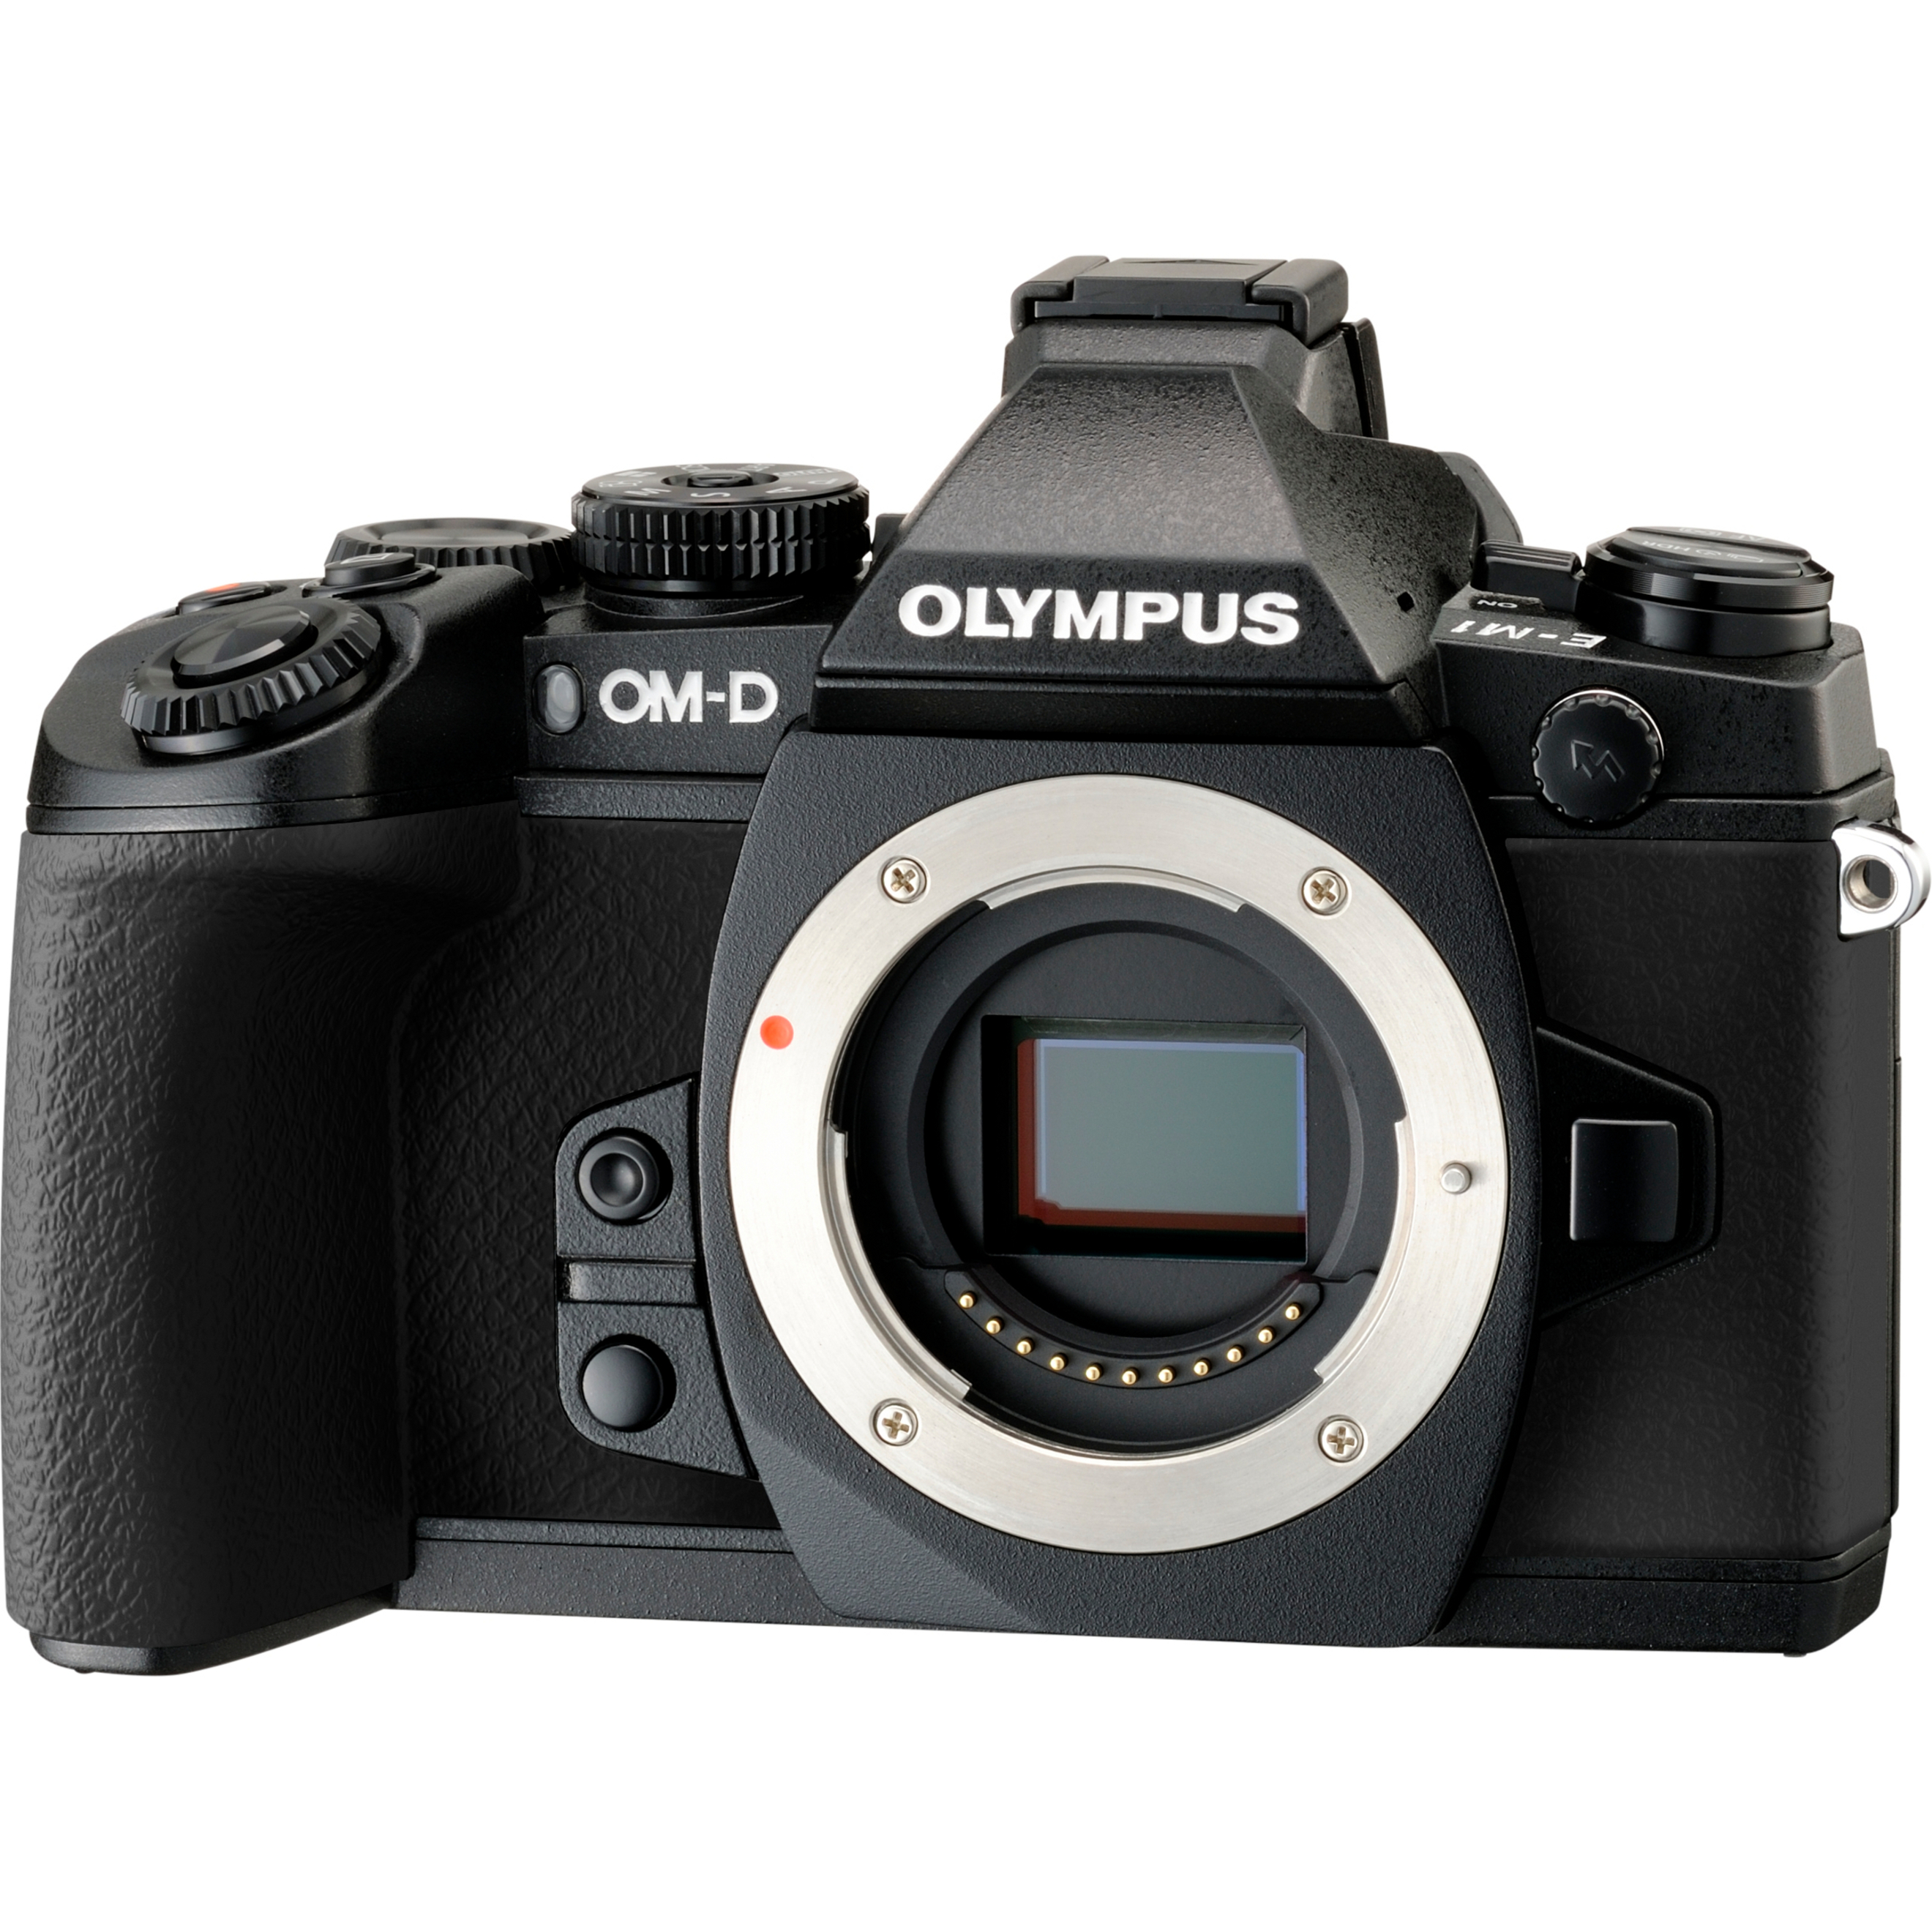 Olympus OM-D E-M1 16.3 Megapixel Mirrorless Camera Body Only, Black - image 1 of 2